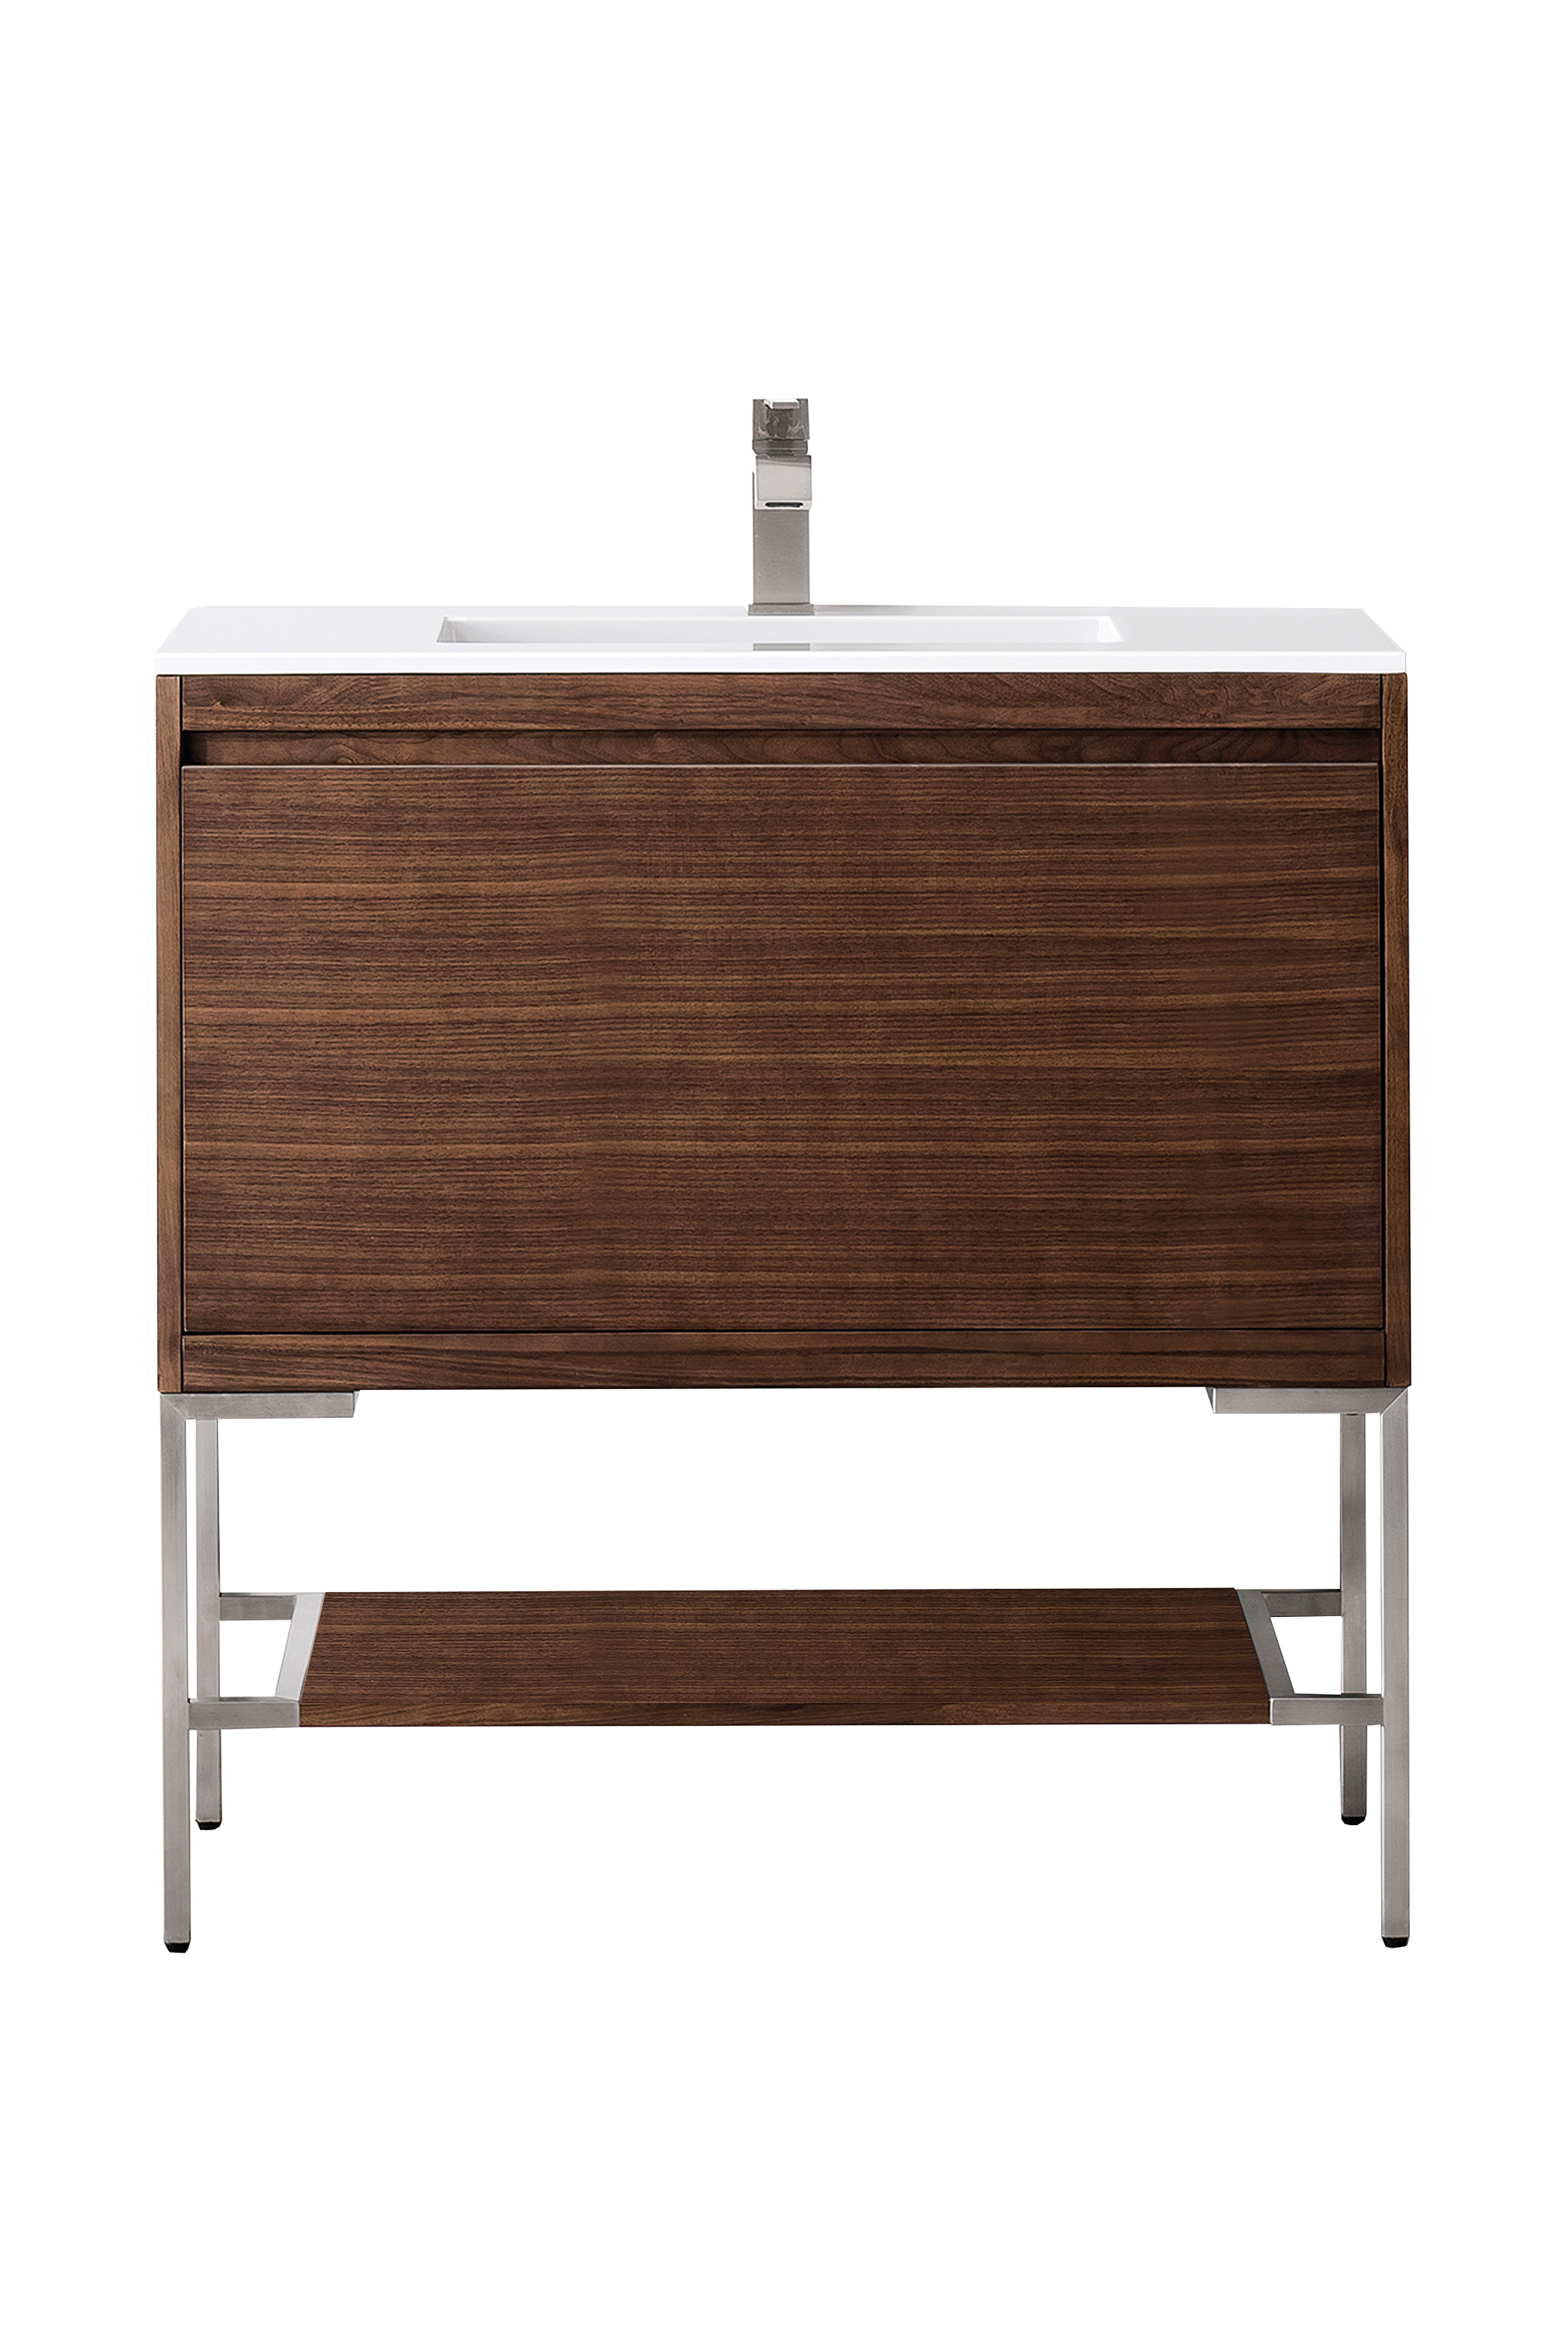 James Martin 801V35.4WLTBNKGW Milan 35.4" Single Vanity Cabinet, Mid Century Walnut, Brushed Nickel w/Glossy White Composite Top